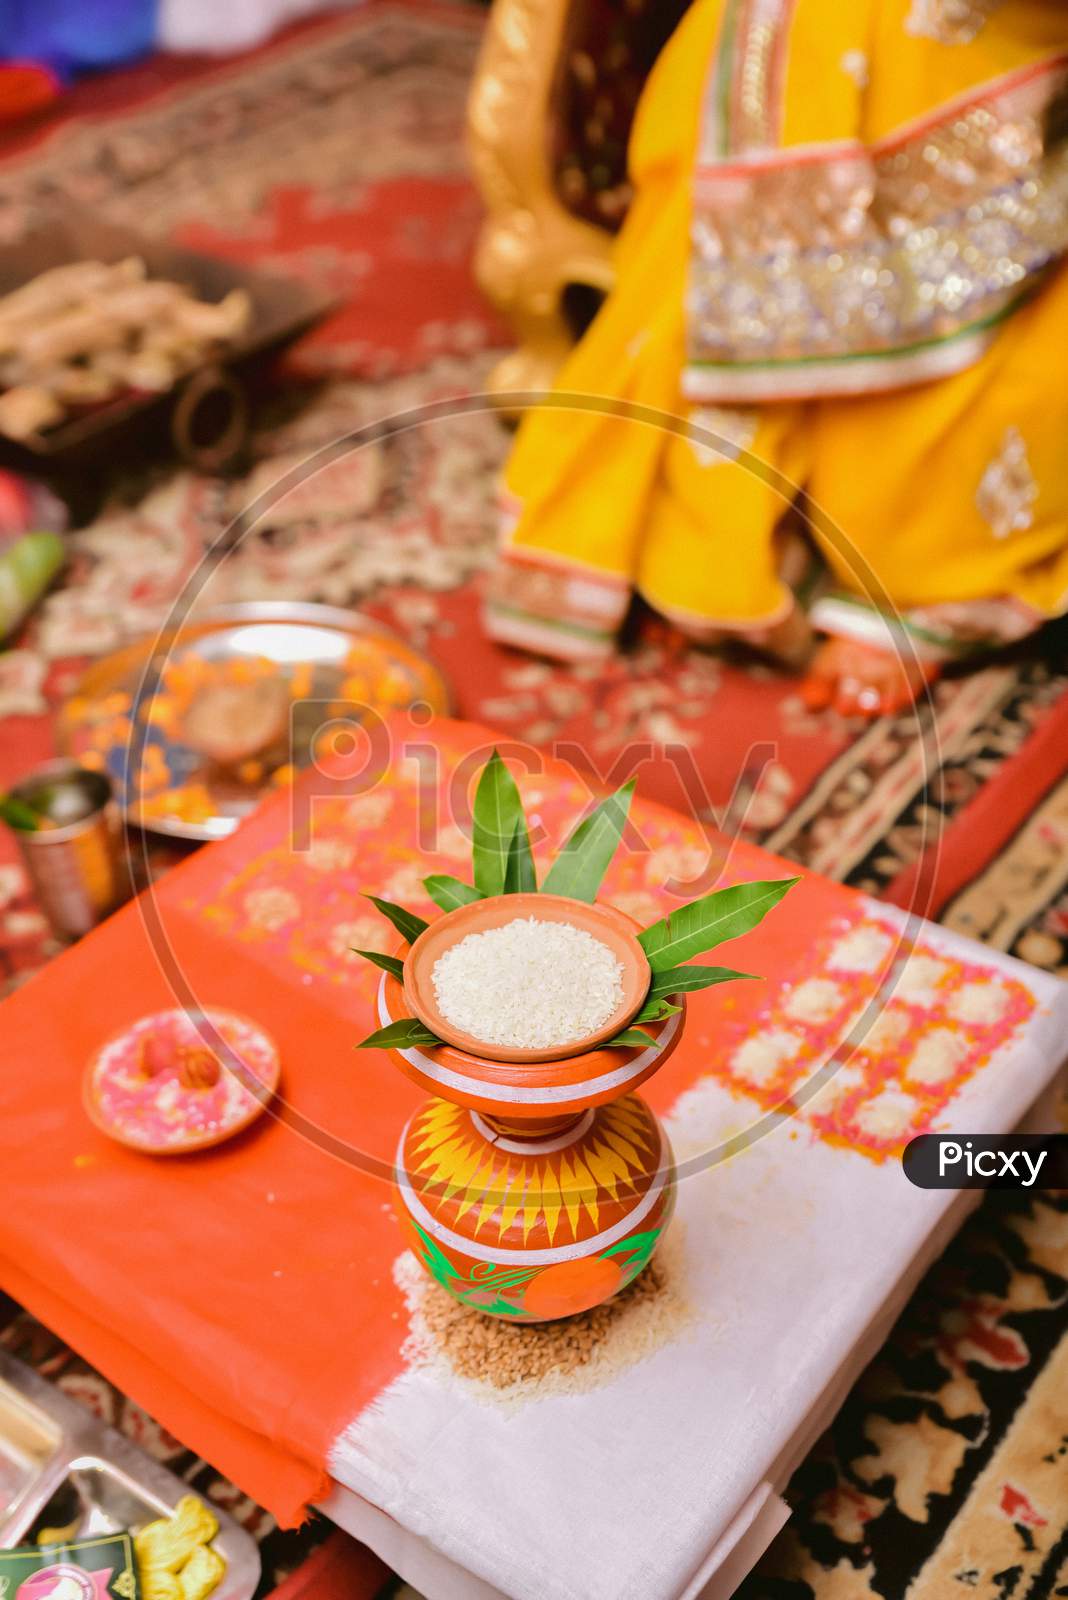 Haldi kutna in a wedding function event in India